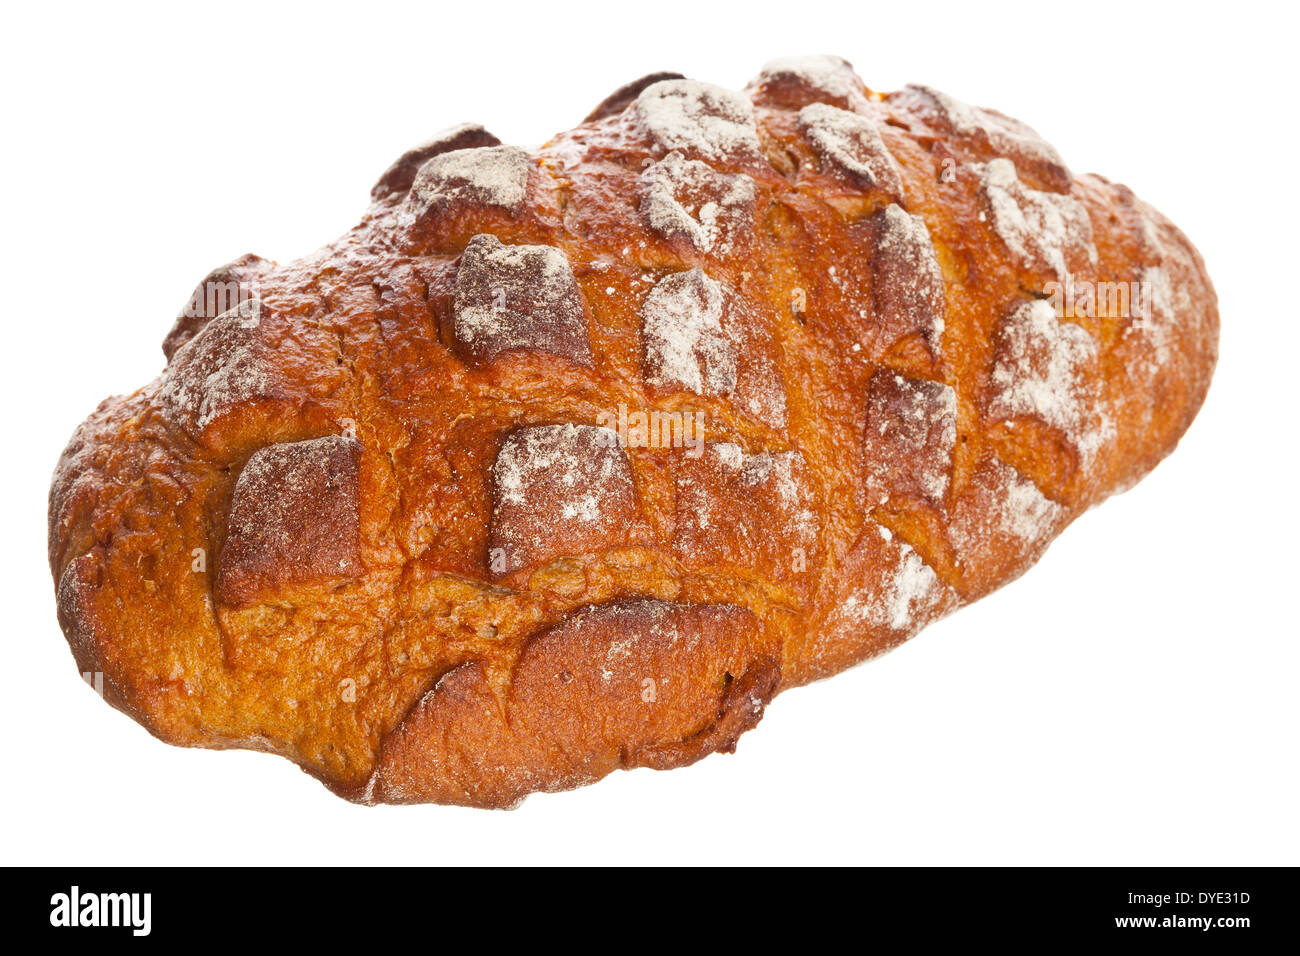 One loaf of rustic homemade farmhouse bread isolated on white background Stock Photo